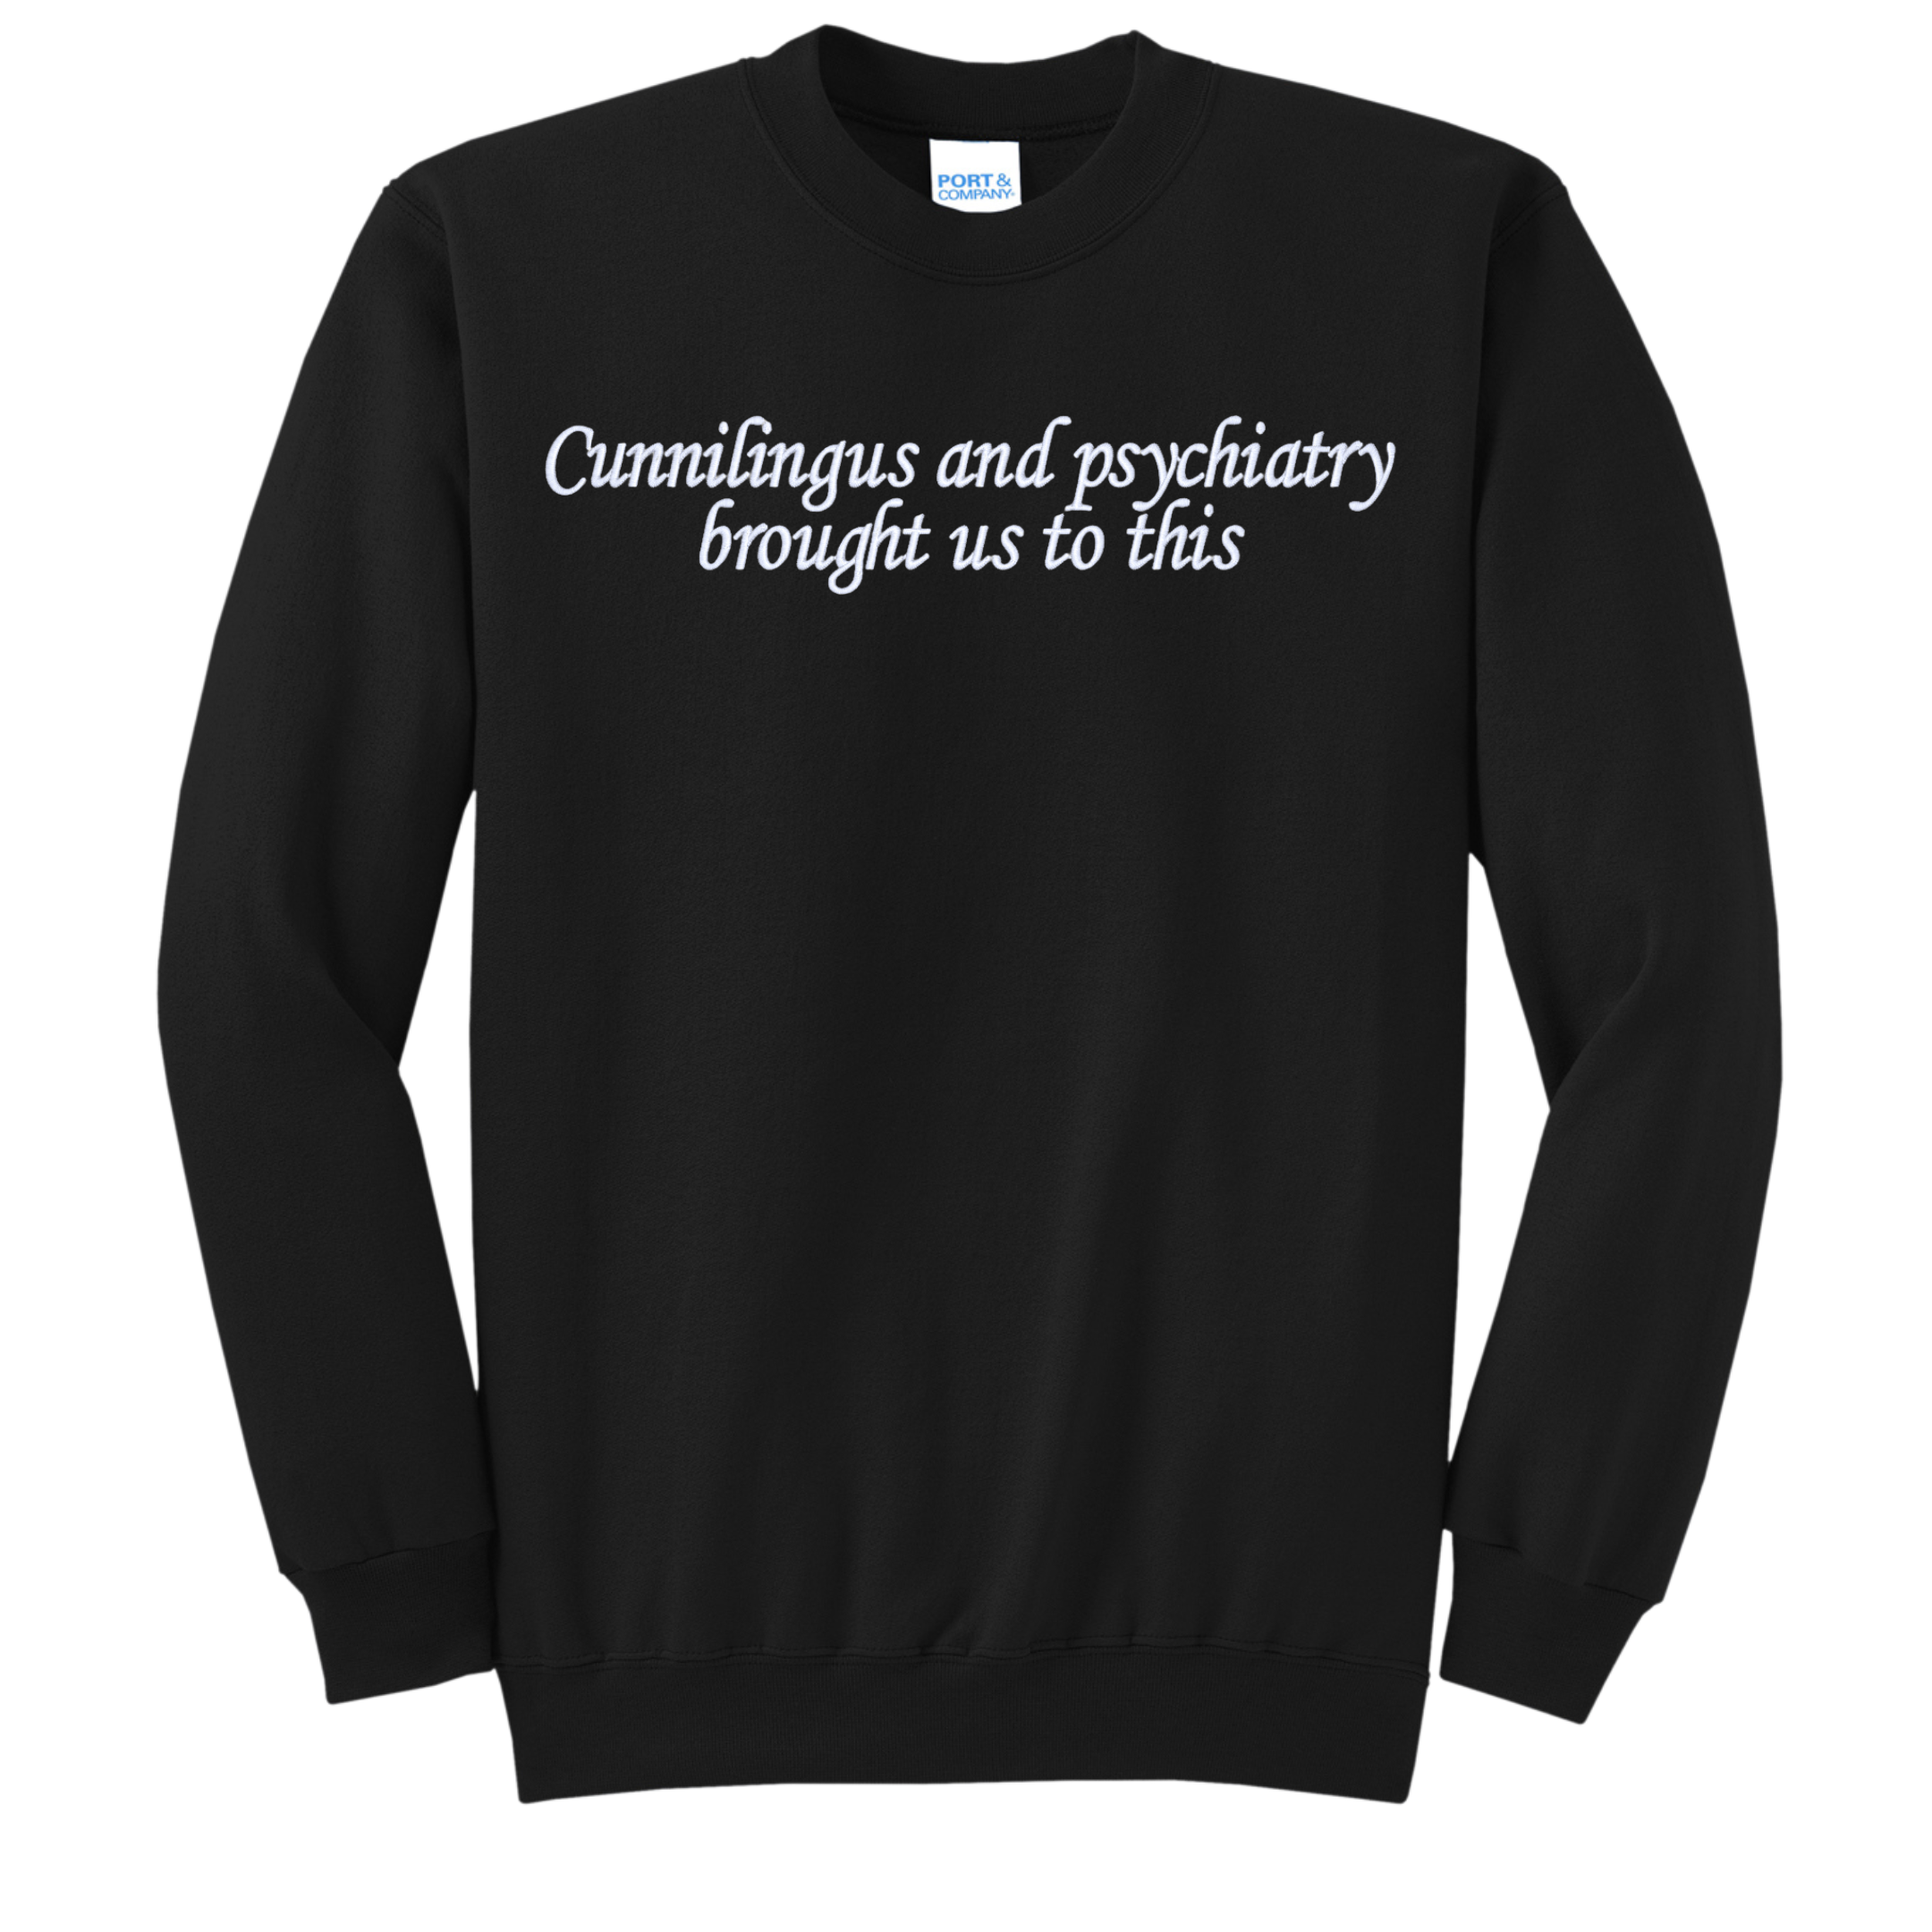 Cunnilingus and Psychiatry Brought Us To This Sopranos Quote Embroidered Crewneck Sweatshirt, Black, Unisex